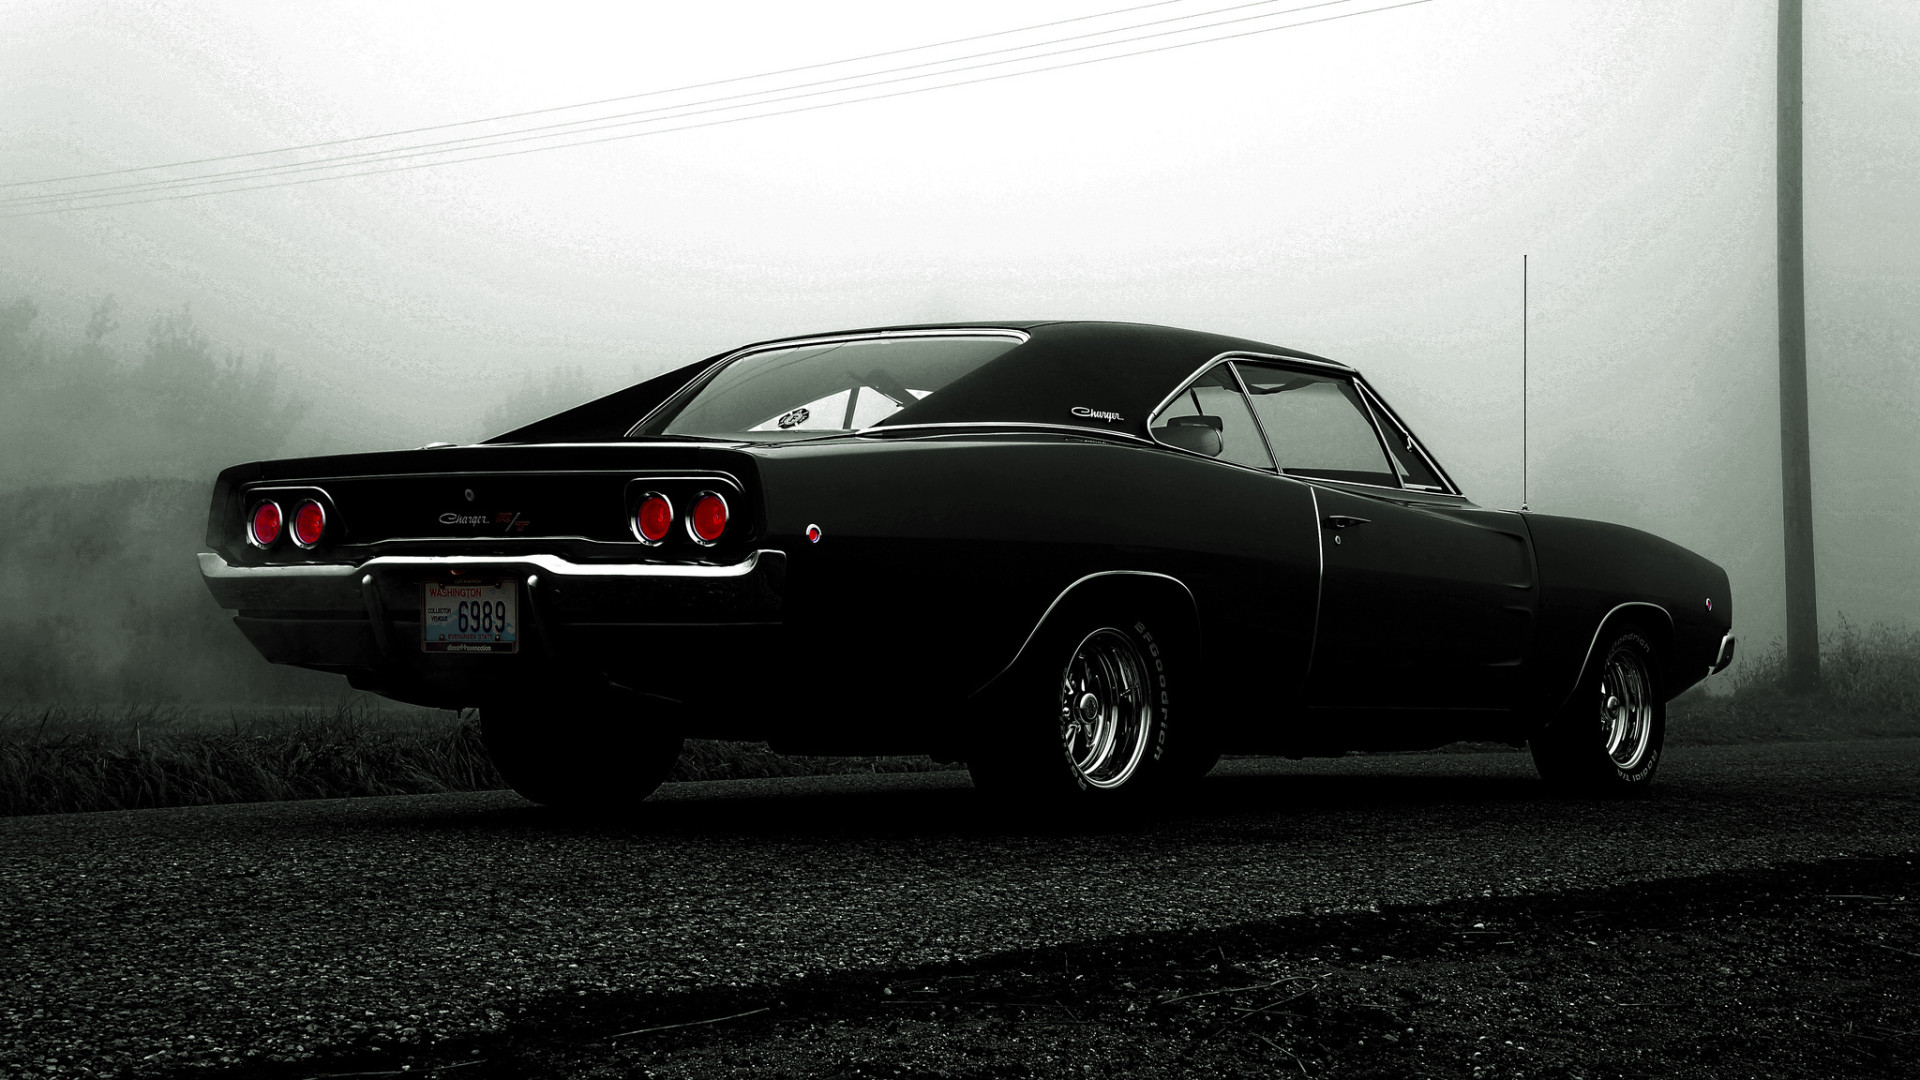 Dodge Charger Wallpaper Image And